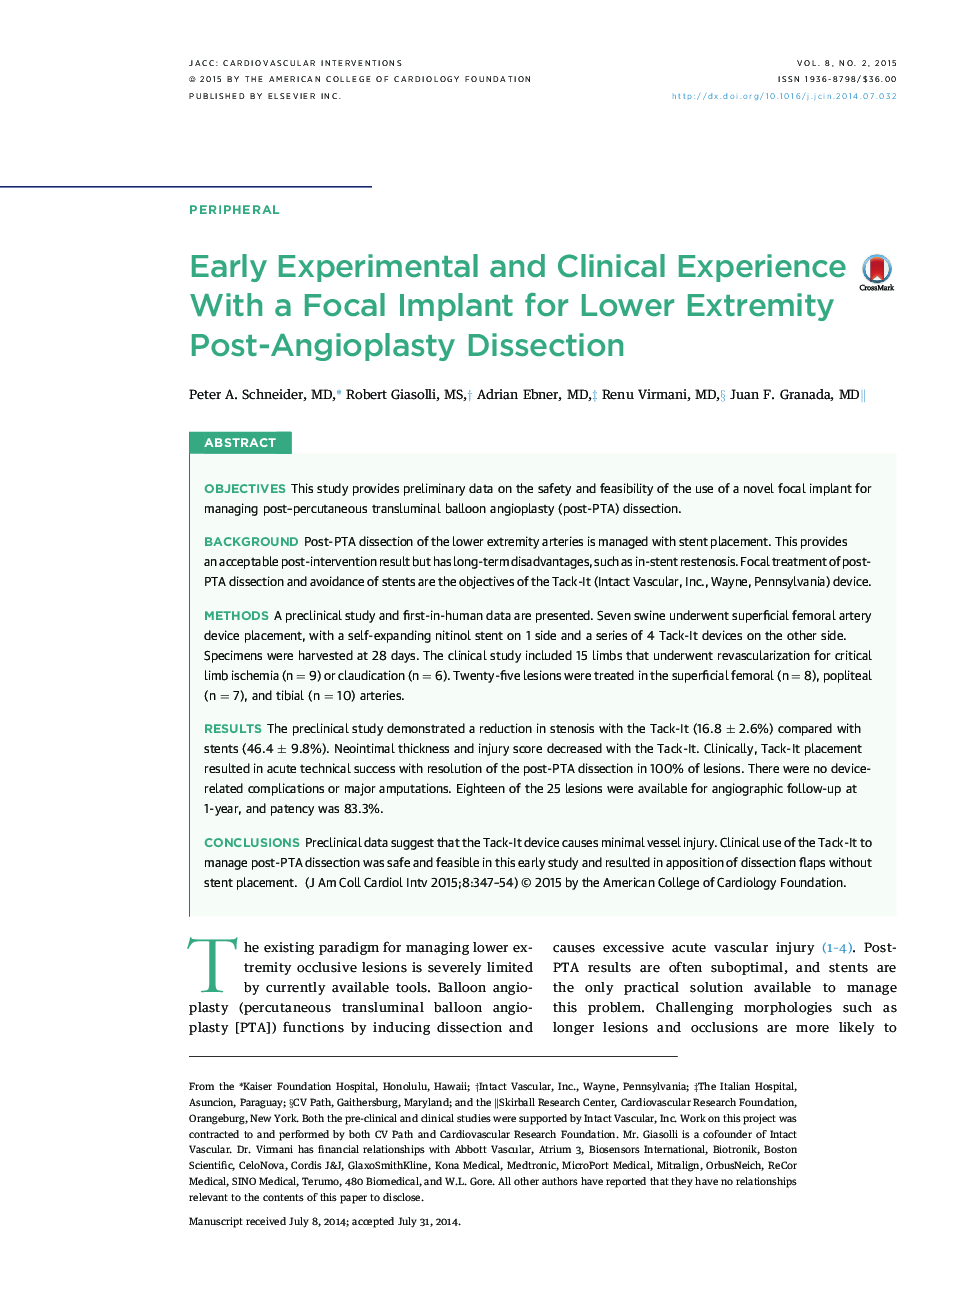 Early Experimental and Clinical Experience With a Focal Implant for Lower Extremity Post-Angioplasty Dissection